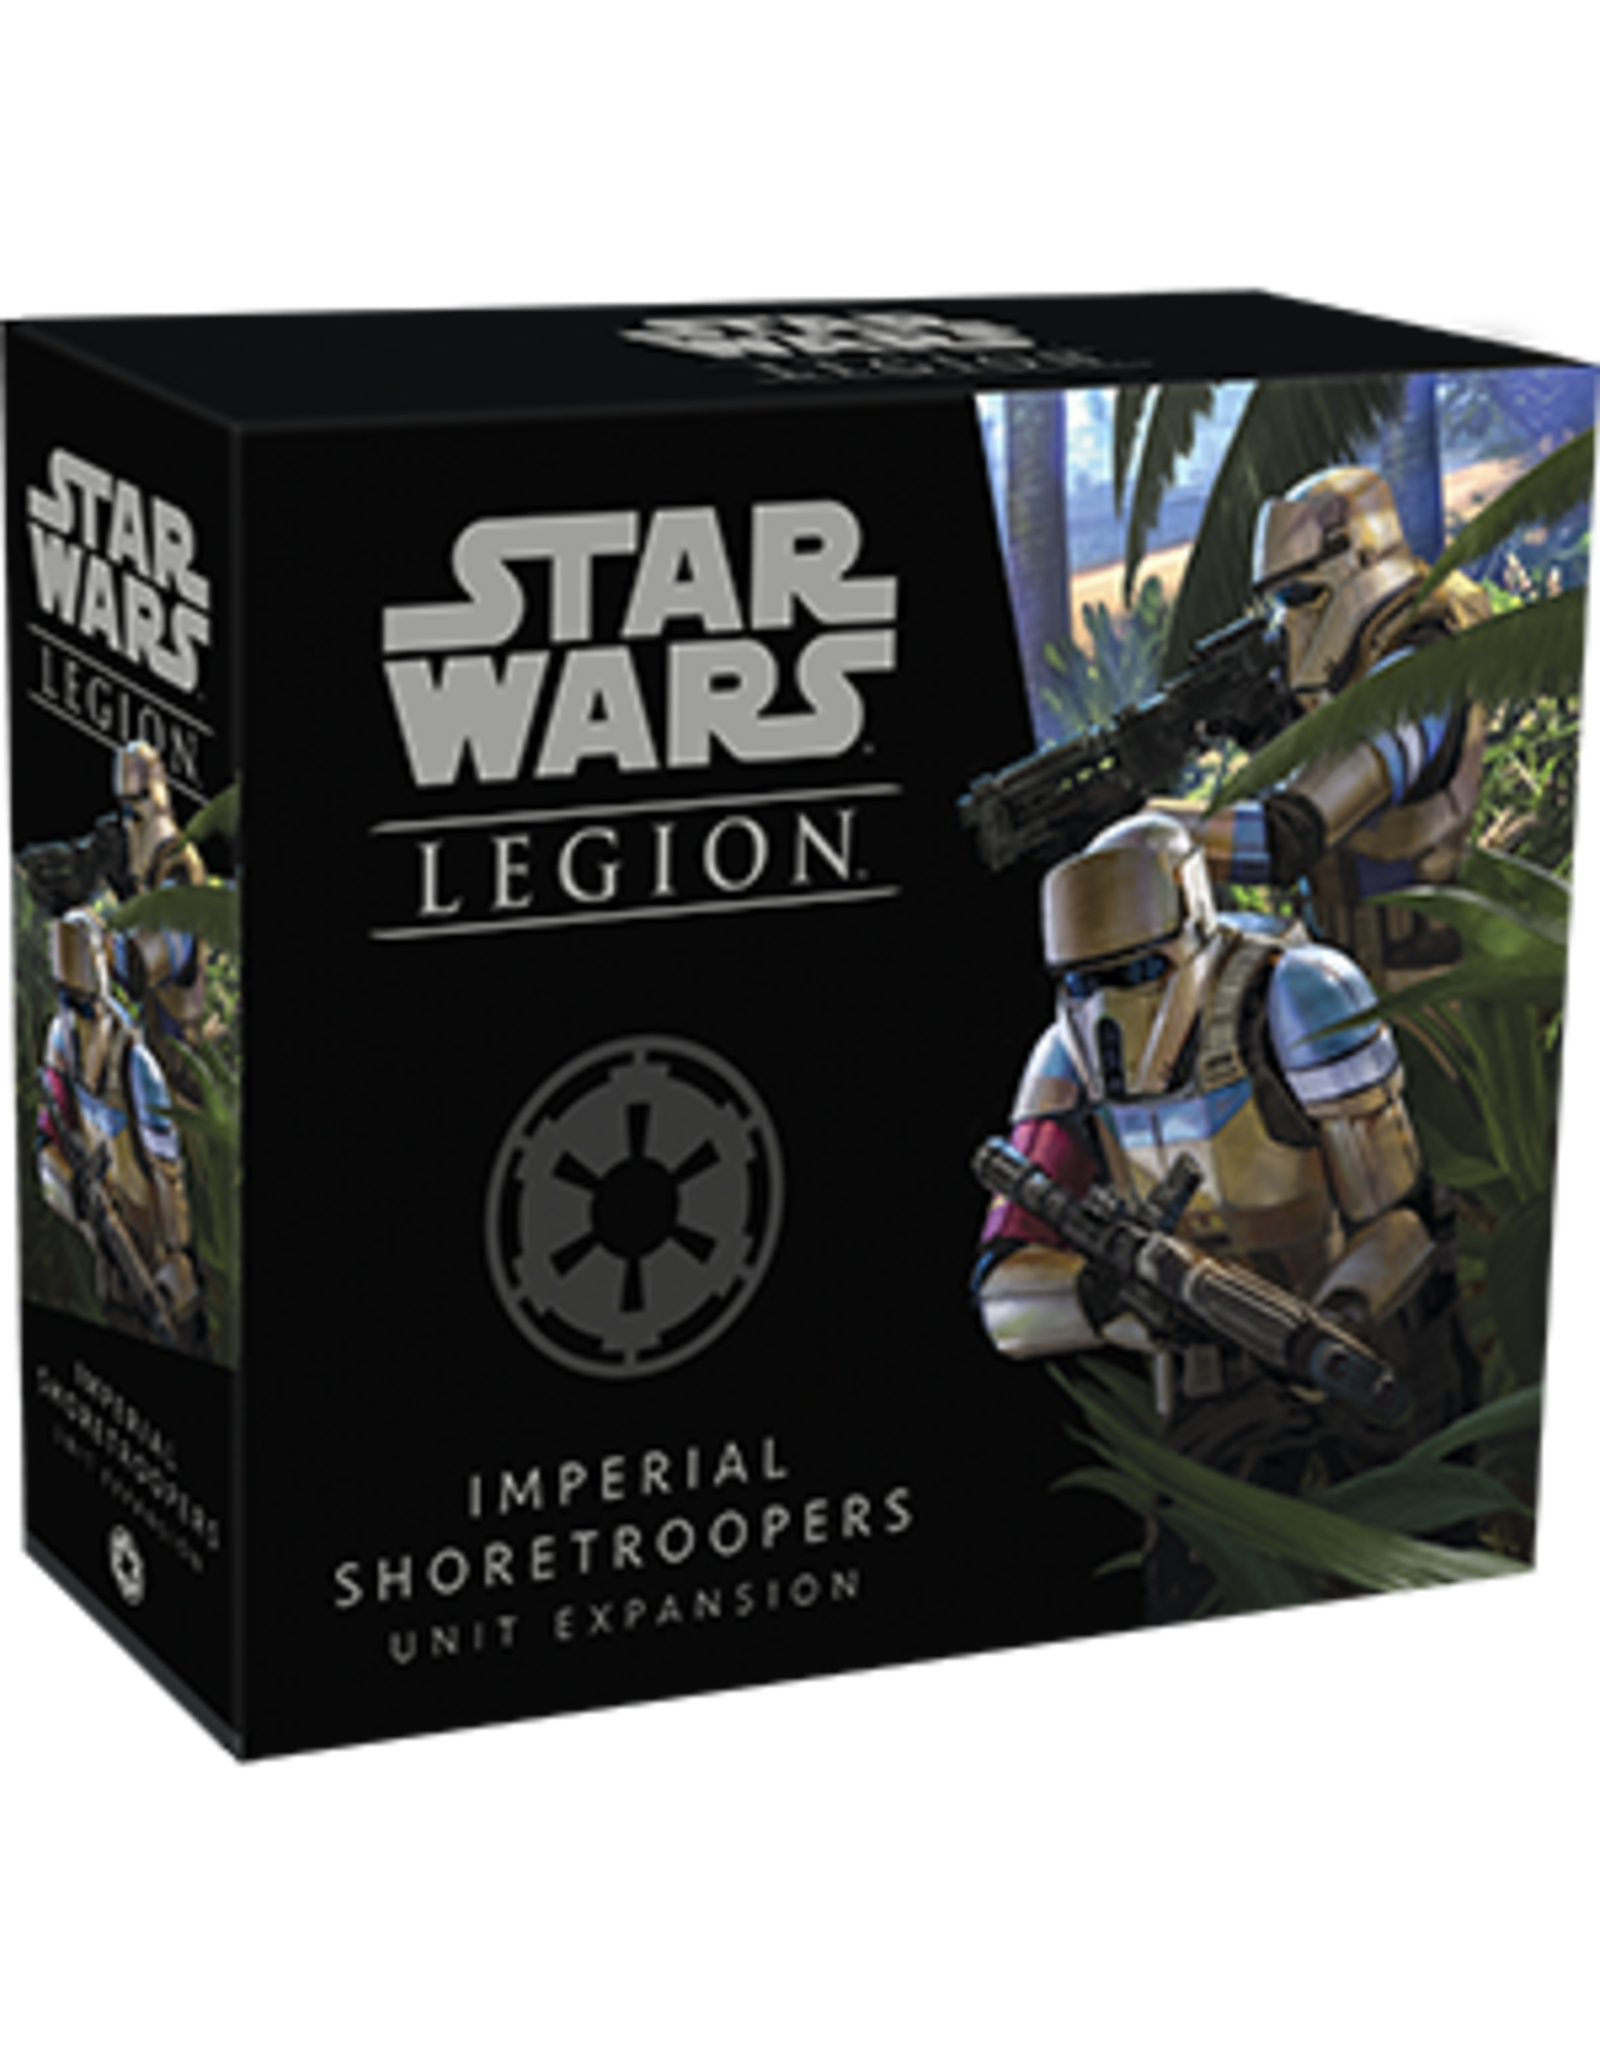 Star Wars: Legions - Imperial Shoretroopers Unit Expansion